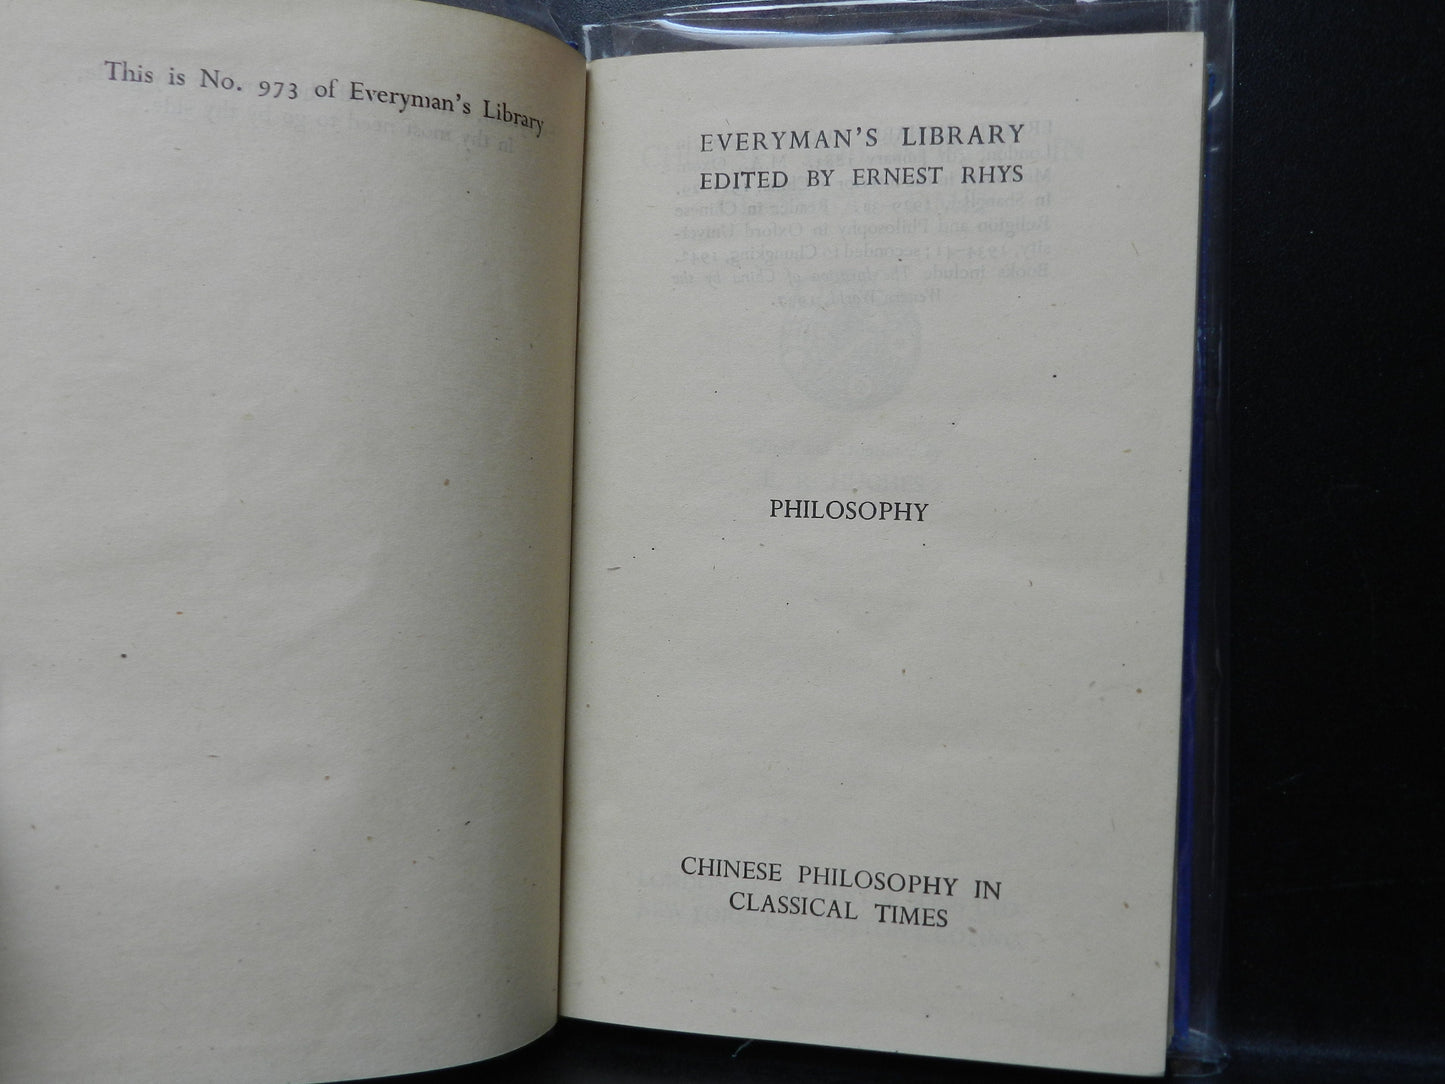 Vintage Book "Chinese Philosophy in Classical Time" 1944